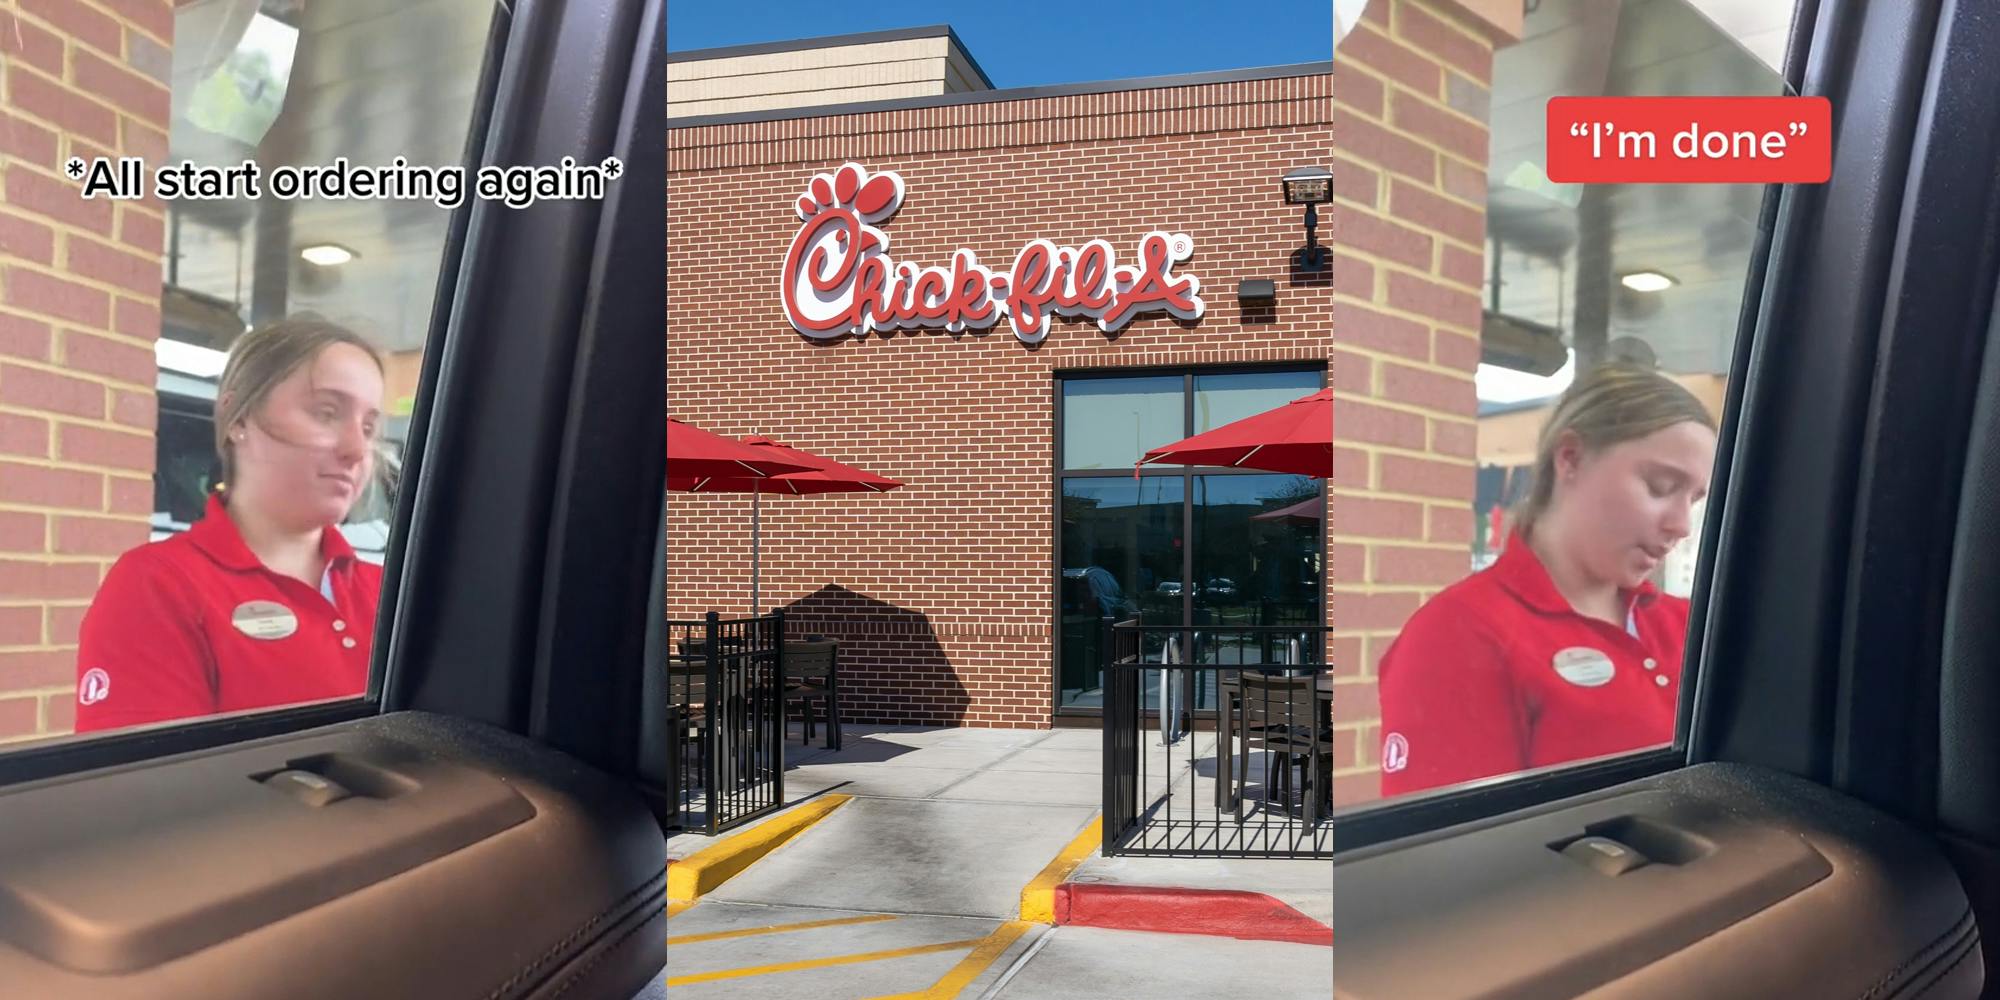 Chick-Fil-A worker taking customers' orders with caption "*All start ordering again*" (l) Chick-Fil-A building with sign (c) Chick-Fil-A worker taking customers' orders with caption ""I'm done"" (r)